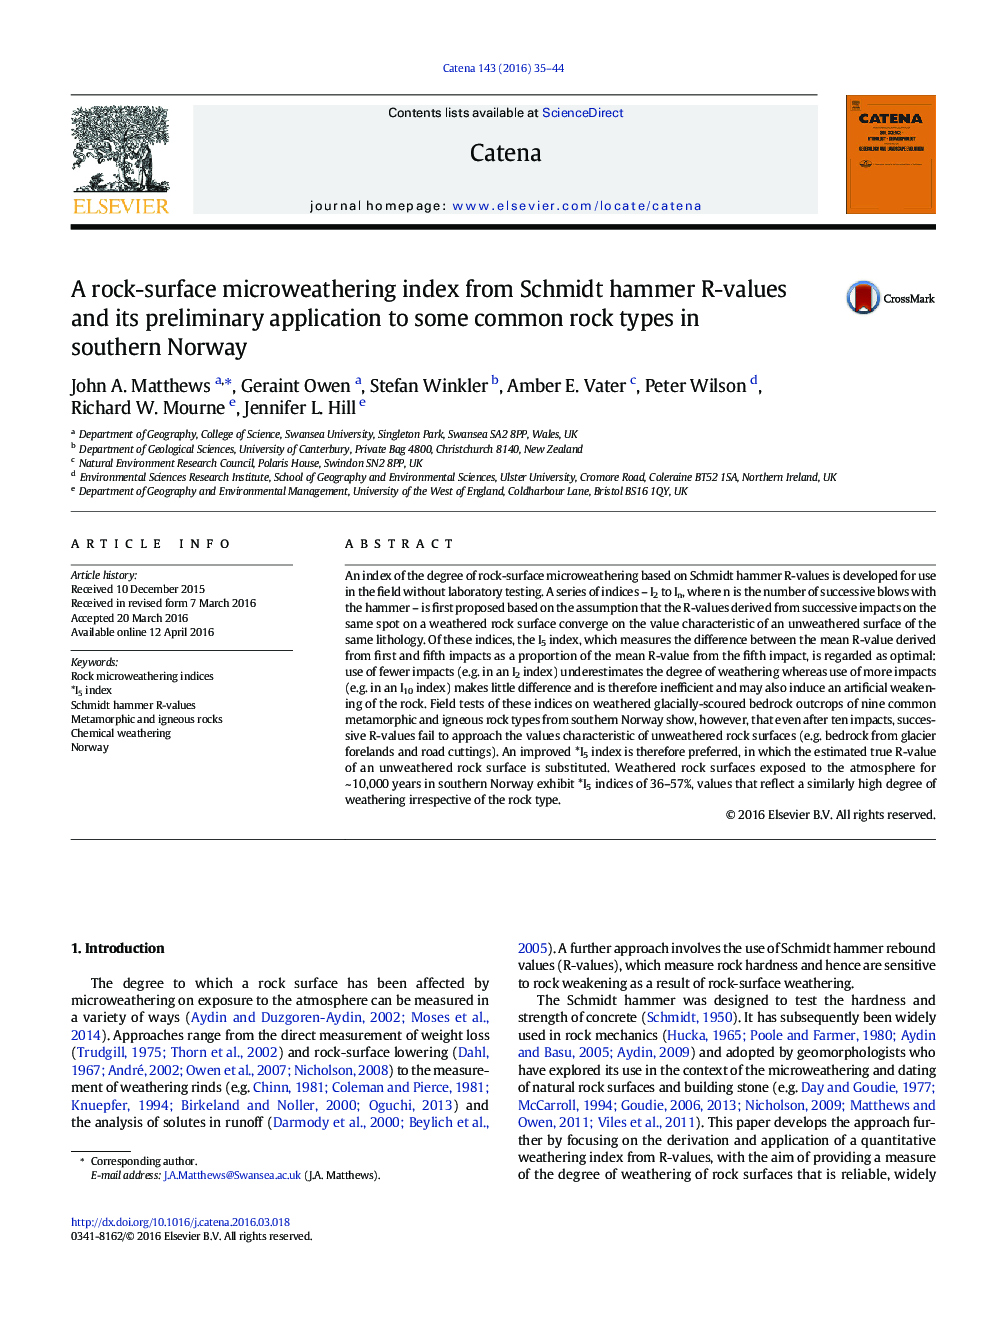 A rock-surface microweathering index from Schmidt hammer R-values and its preliminary application to some common rock types in southern Norway